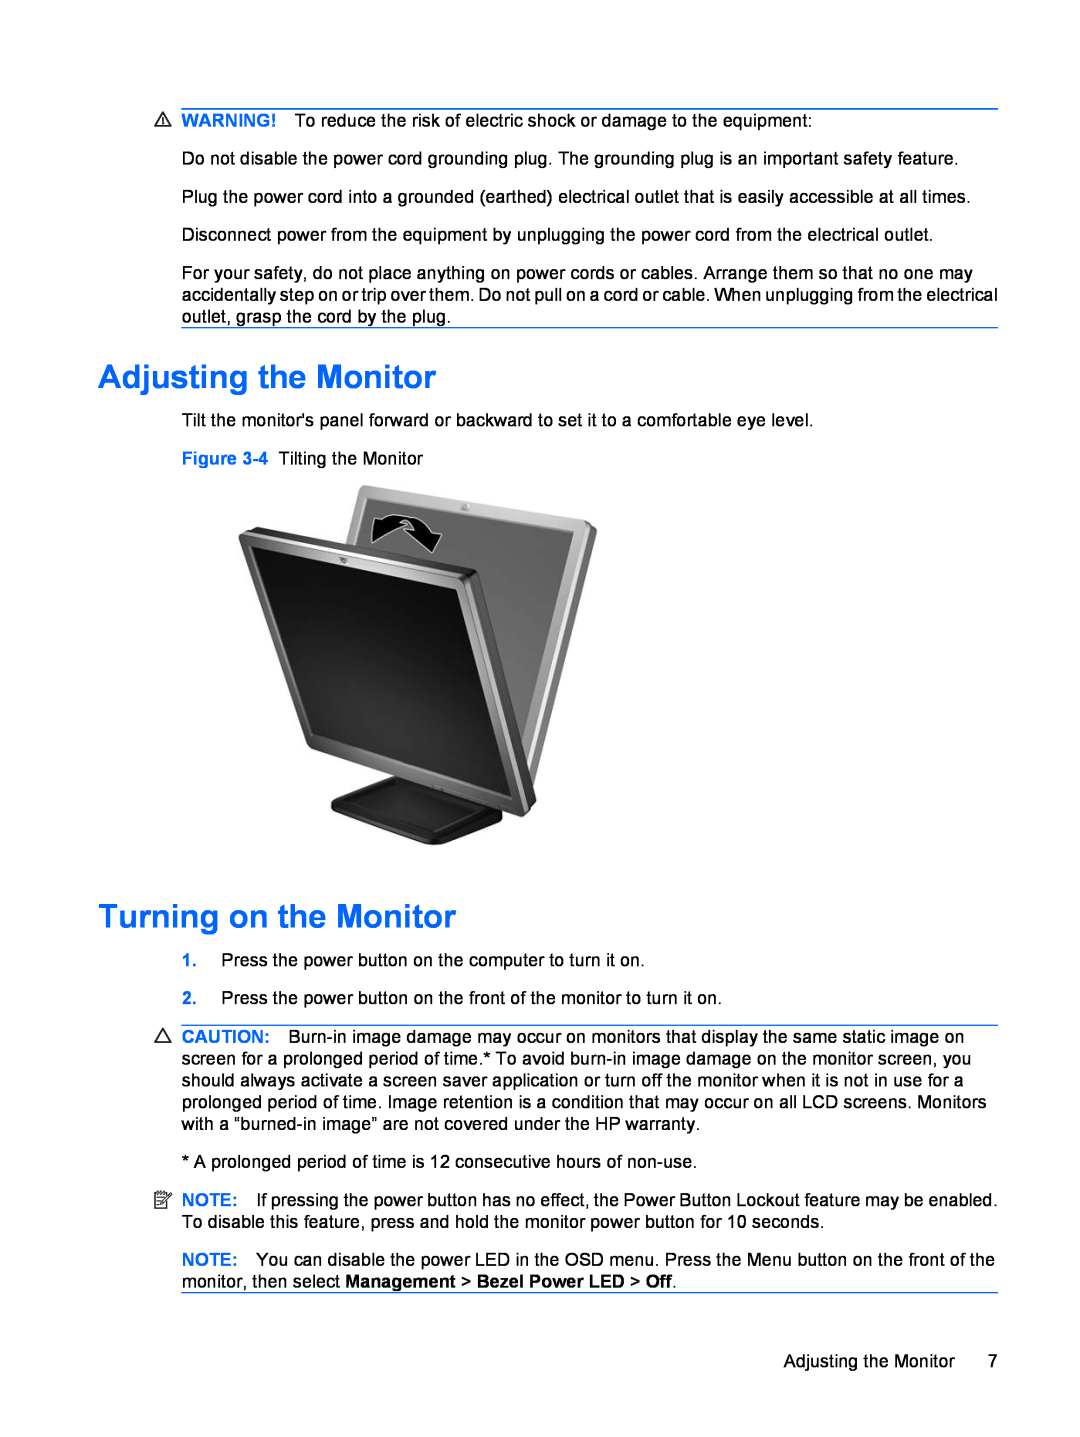 HP LE1711 17-inch manual Adjusting the Monitor, Turning on the Monitor 